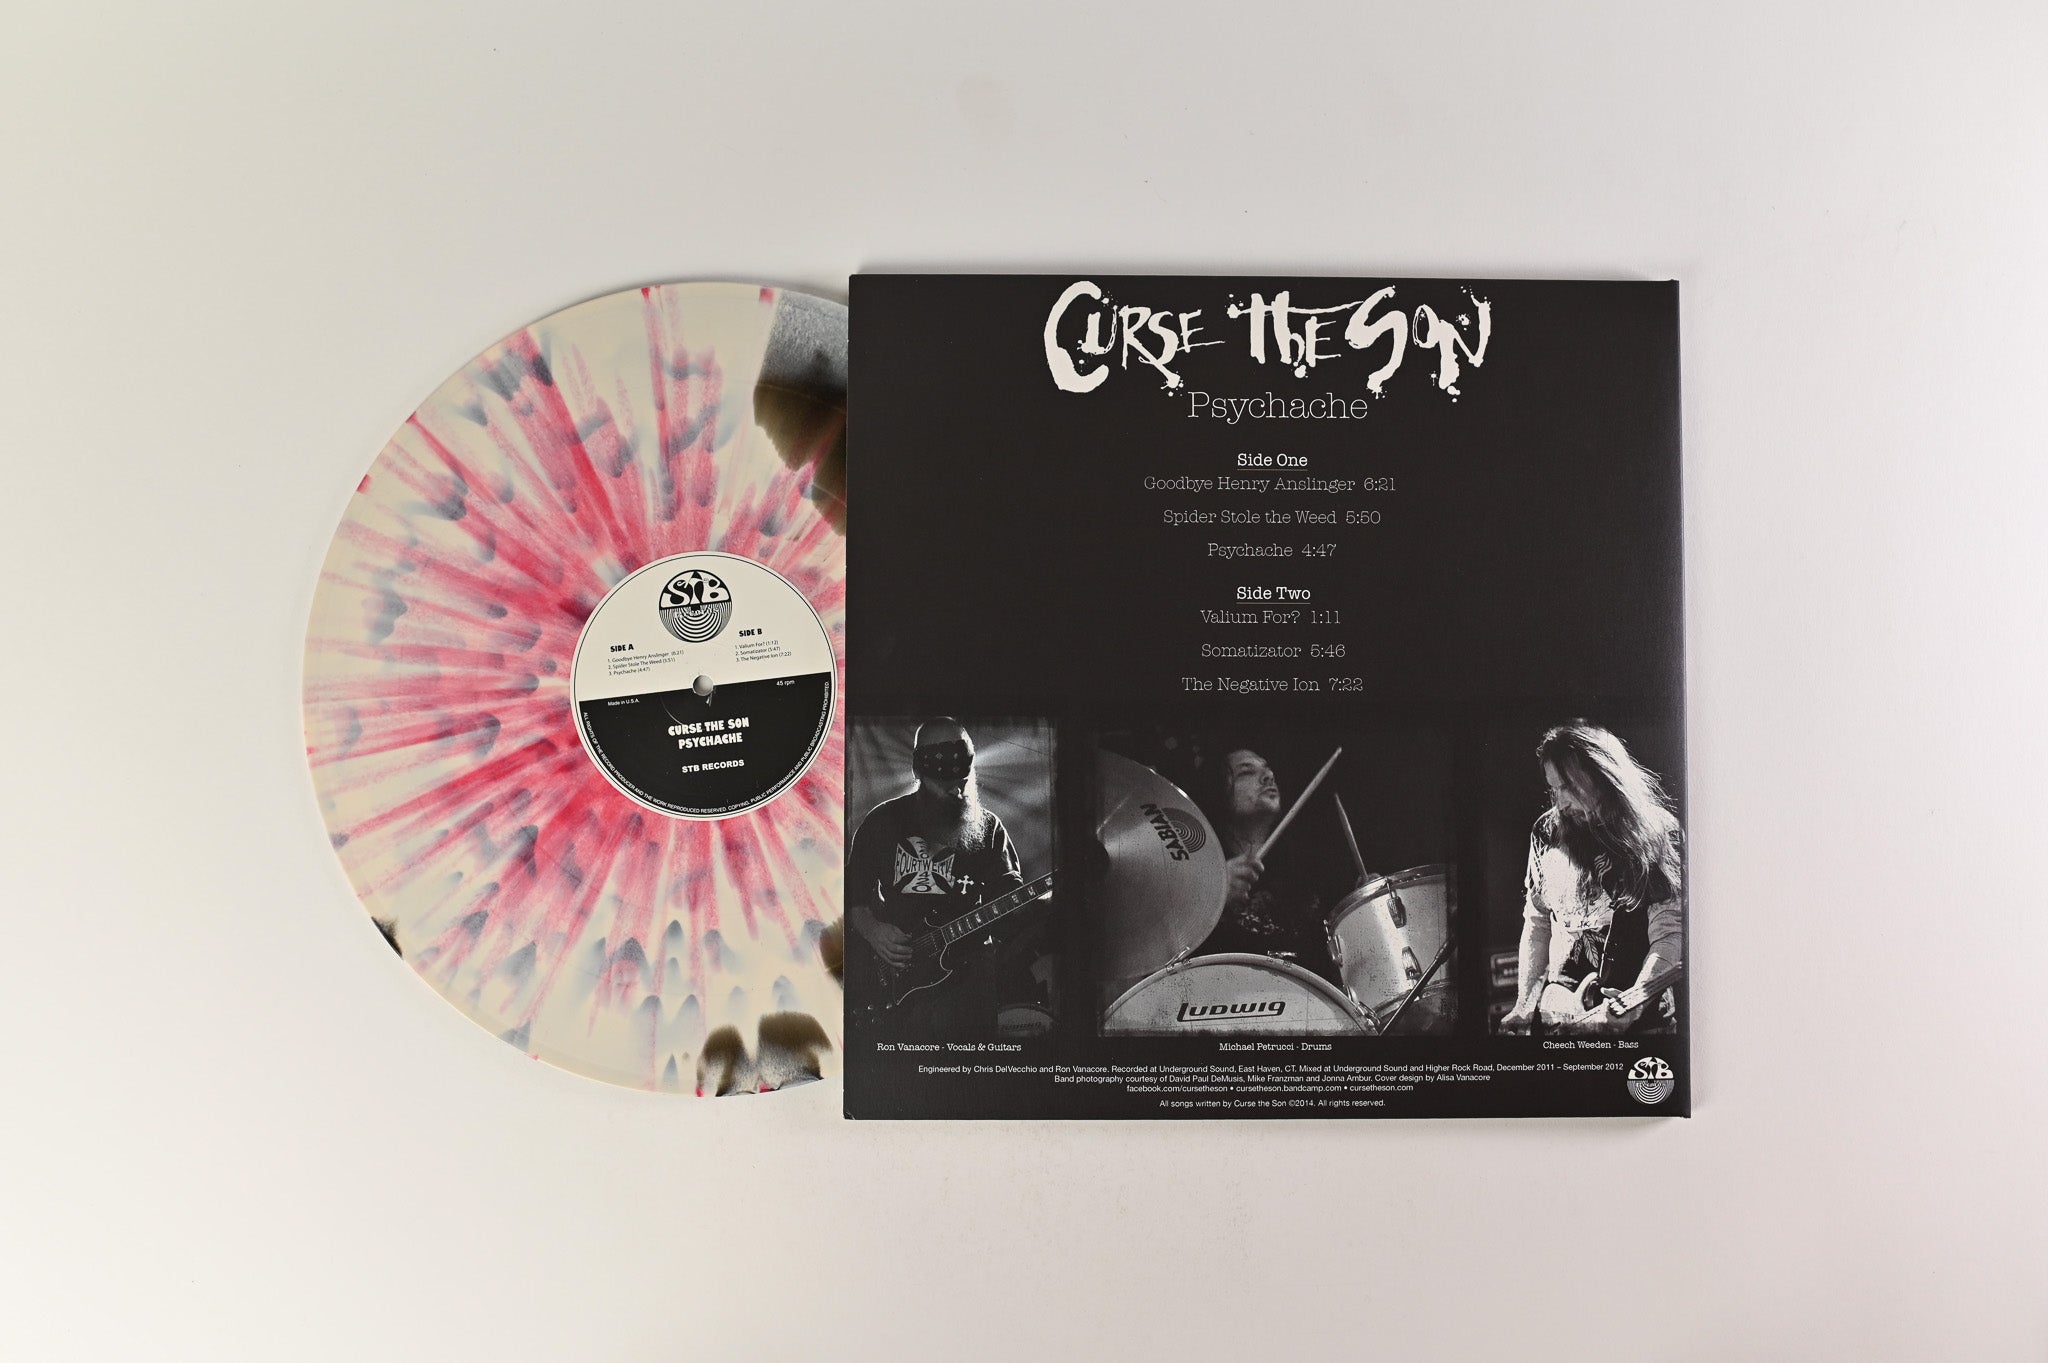 Curse The Son - Psychache on STB Ltd Numbered Die Hard Black And Bone With Blood Splatter Vinyl